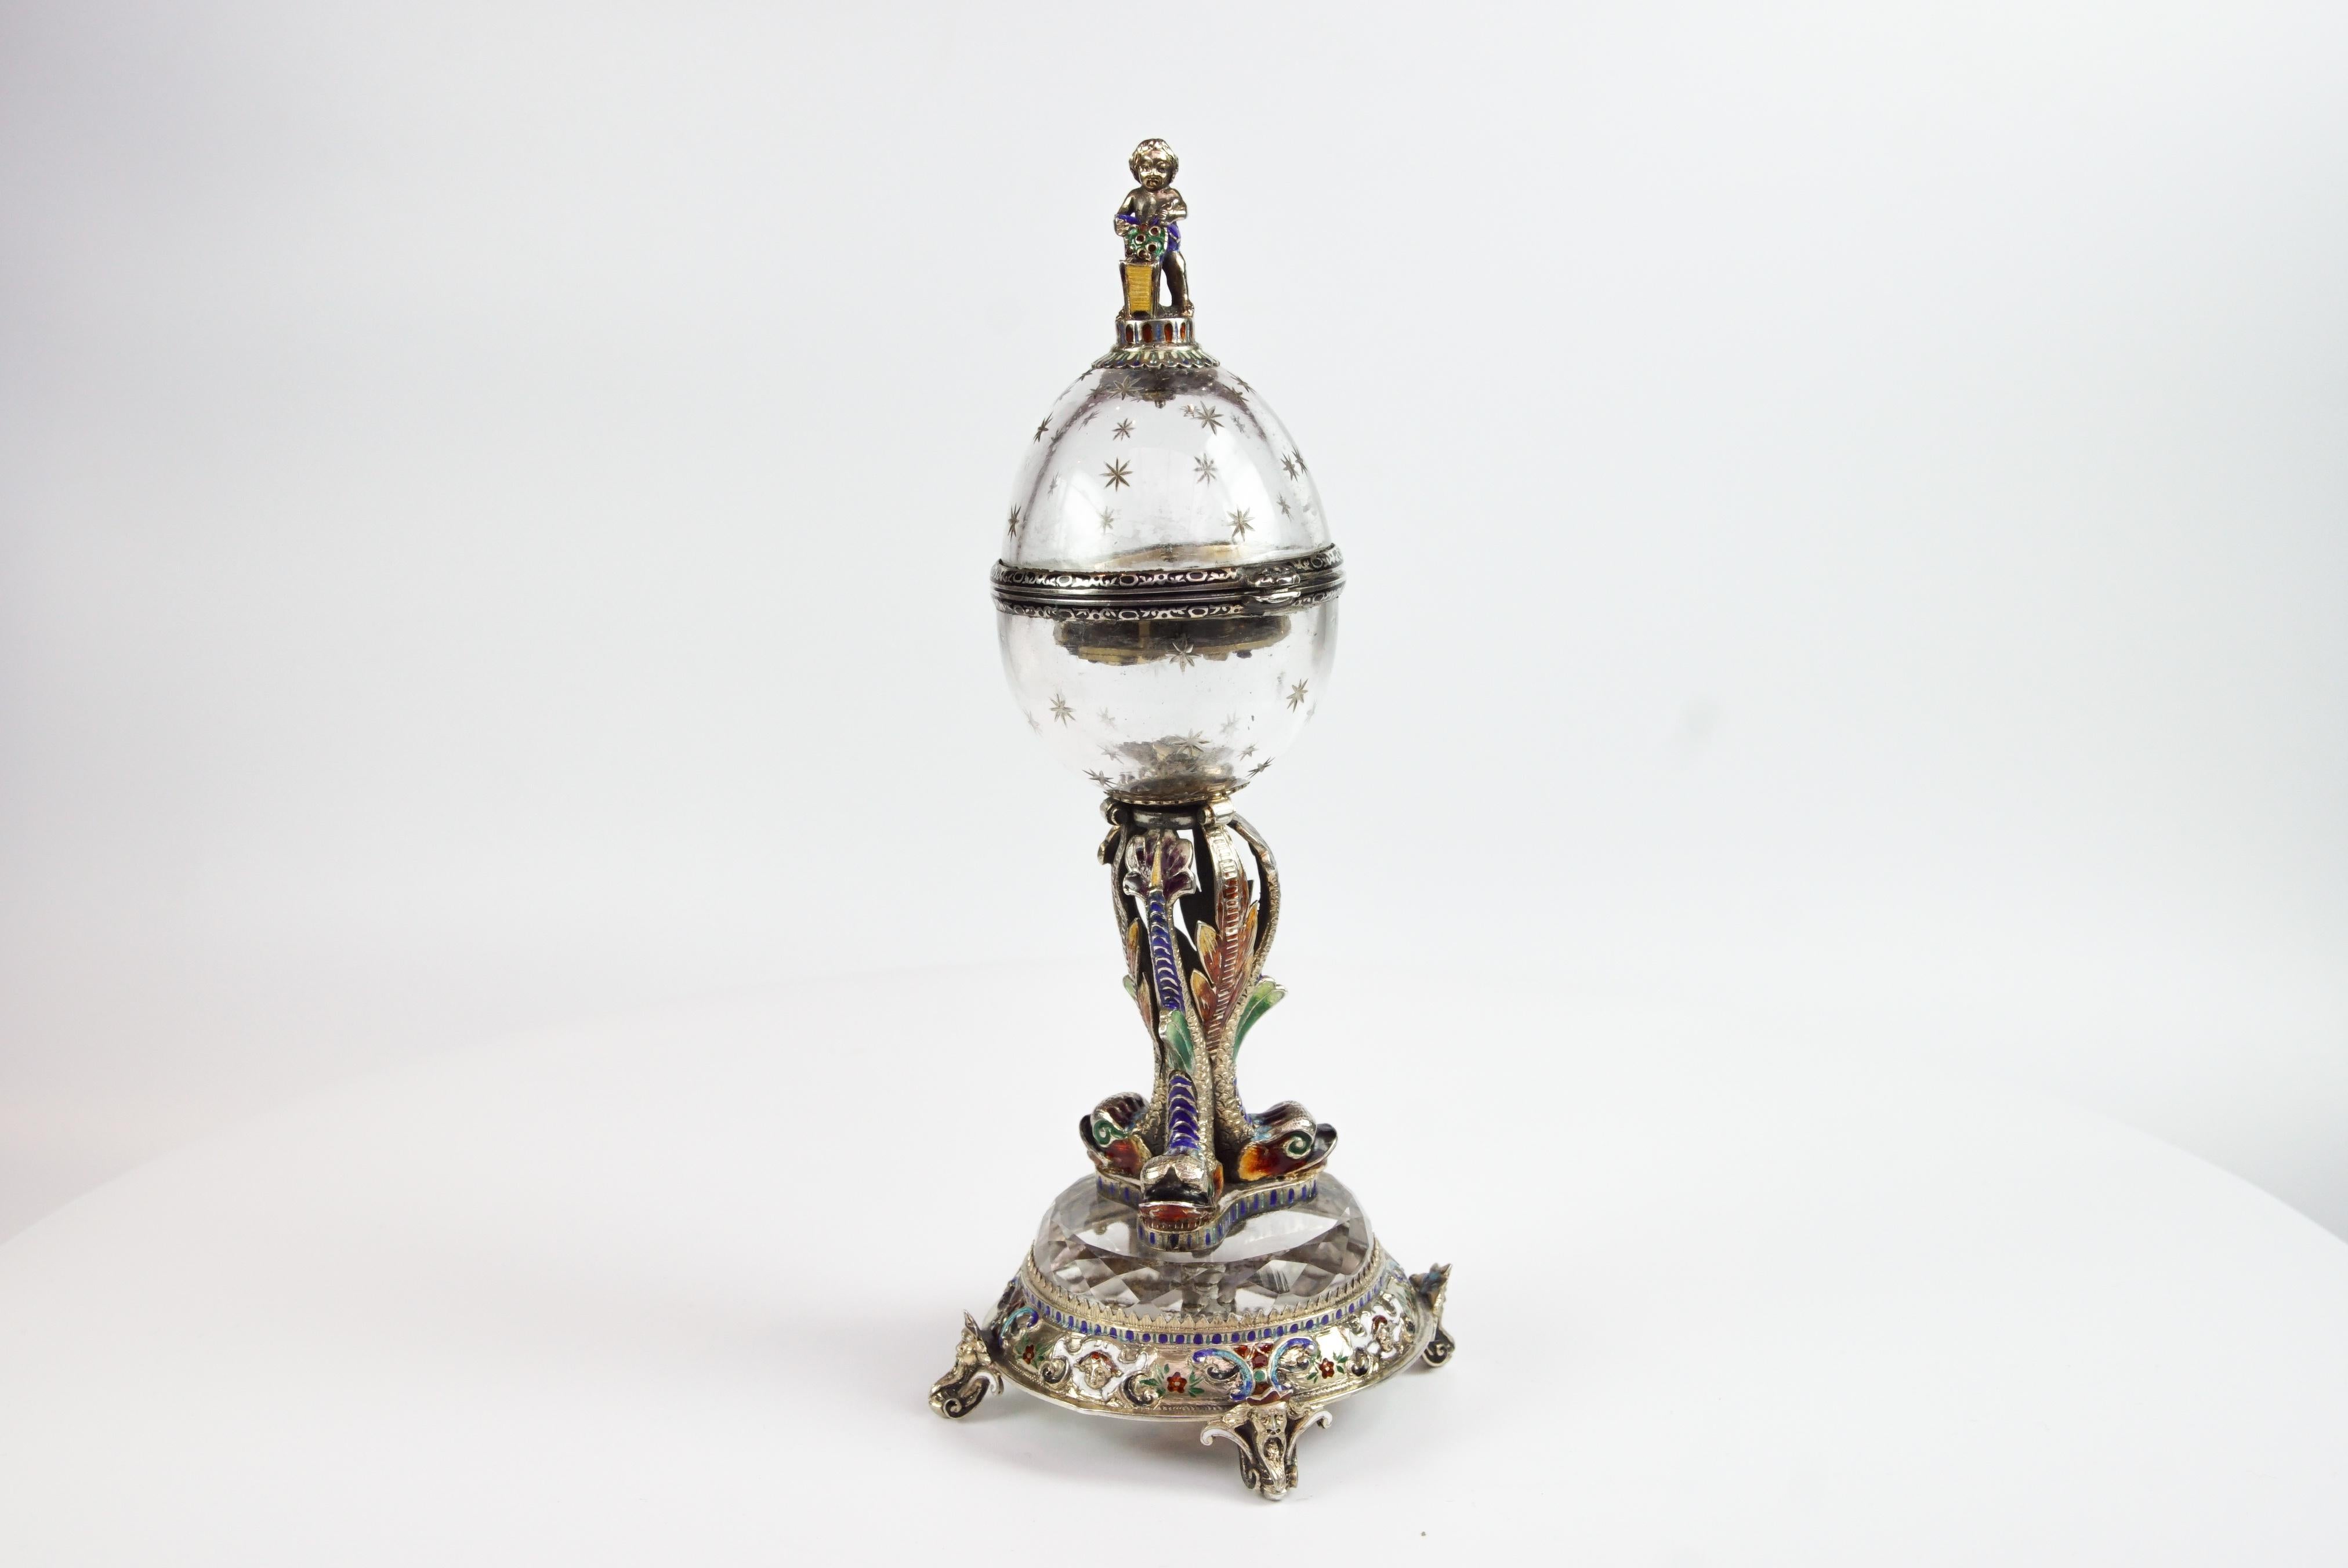 Rare Silver, Rock Crystal, and Enamel Globe Clock by Hermann Bohm,

Rock Crystal Globe Clock, rock crystal with cut stars, Silver gilt and, multicolored enamels hinged, inside also enameled, corresponding dial, blued Breguet steel hands, gilt